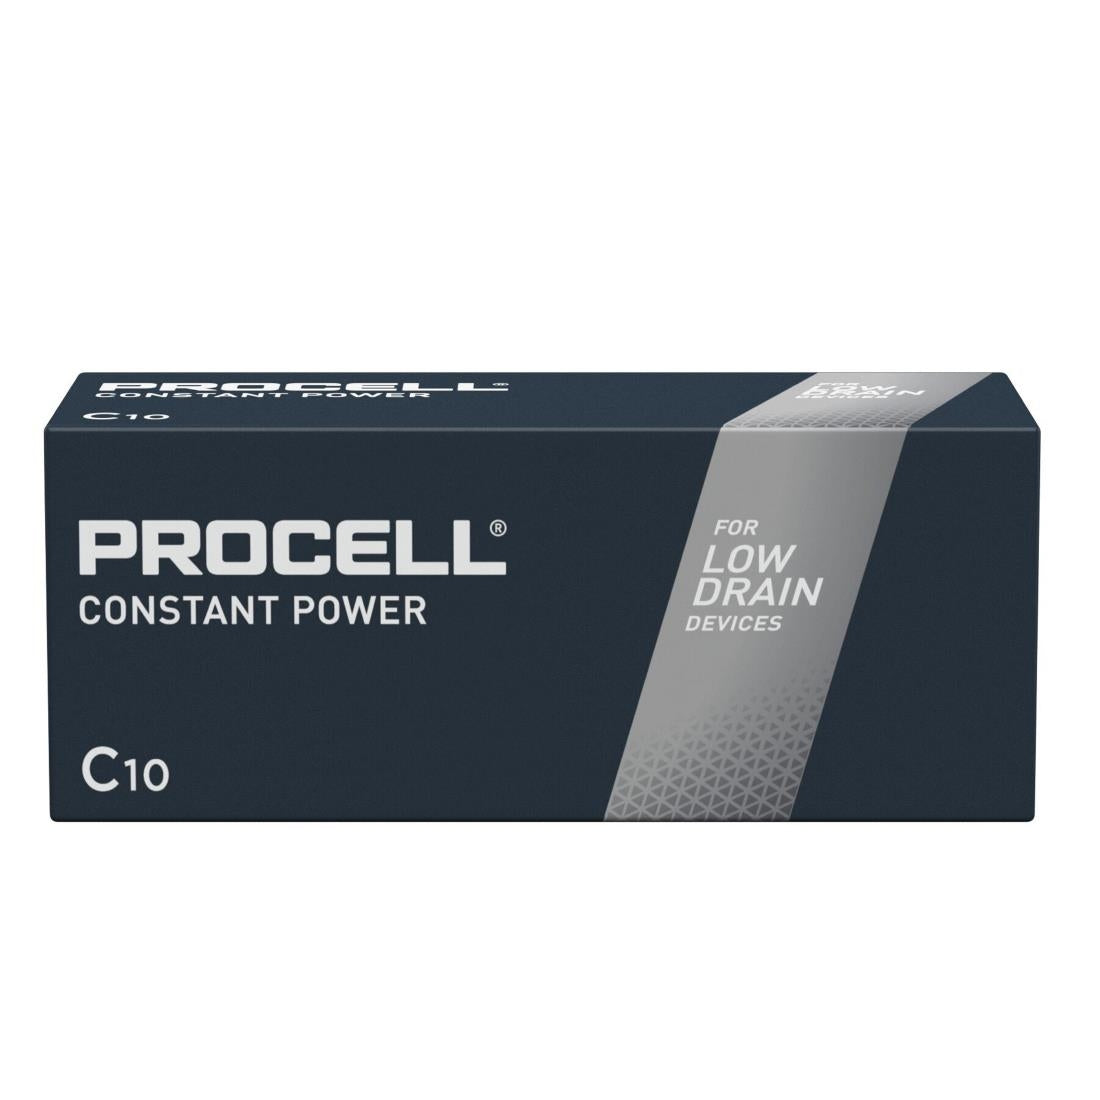 CU752 Duracell Procell Constant Power C 1.5V Battery (Pack of 10) JD Catering Equipment Solutions Ltd